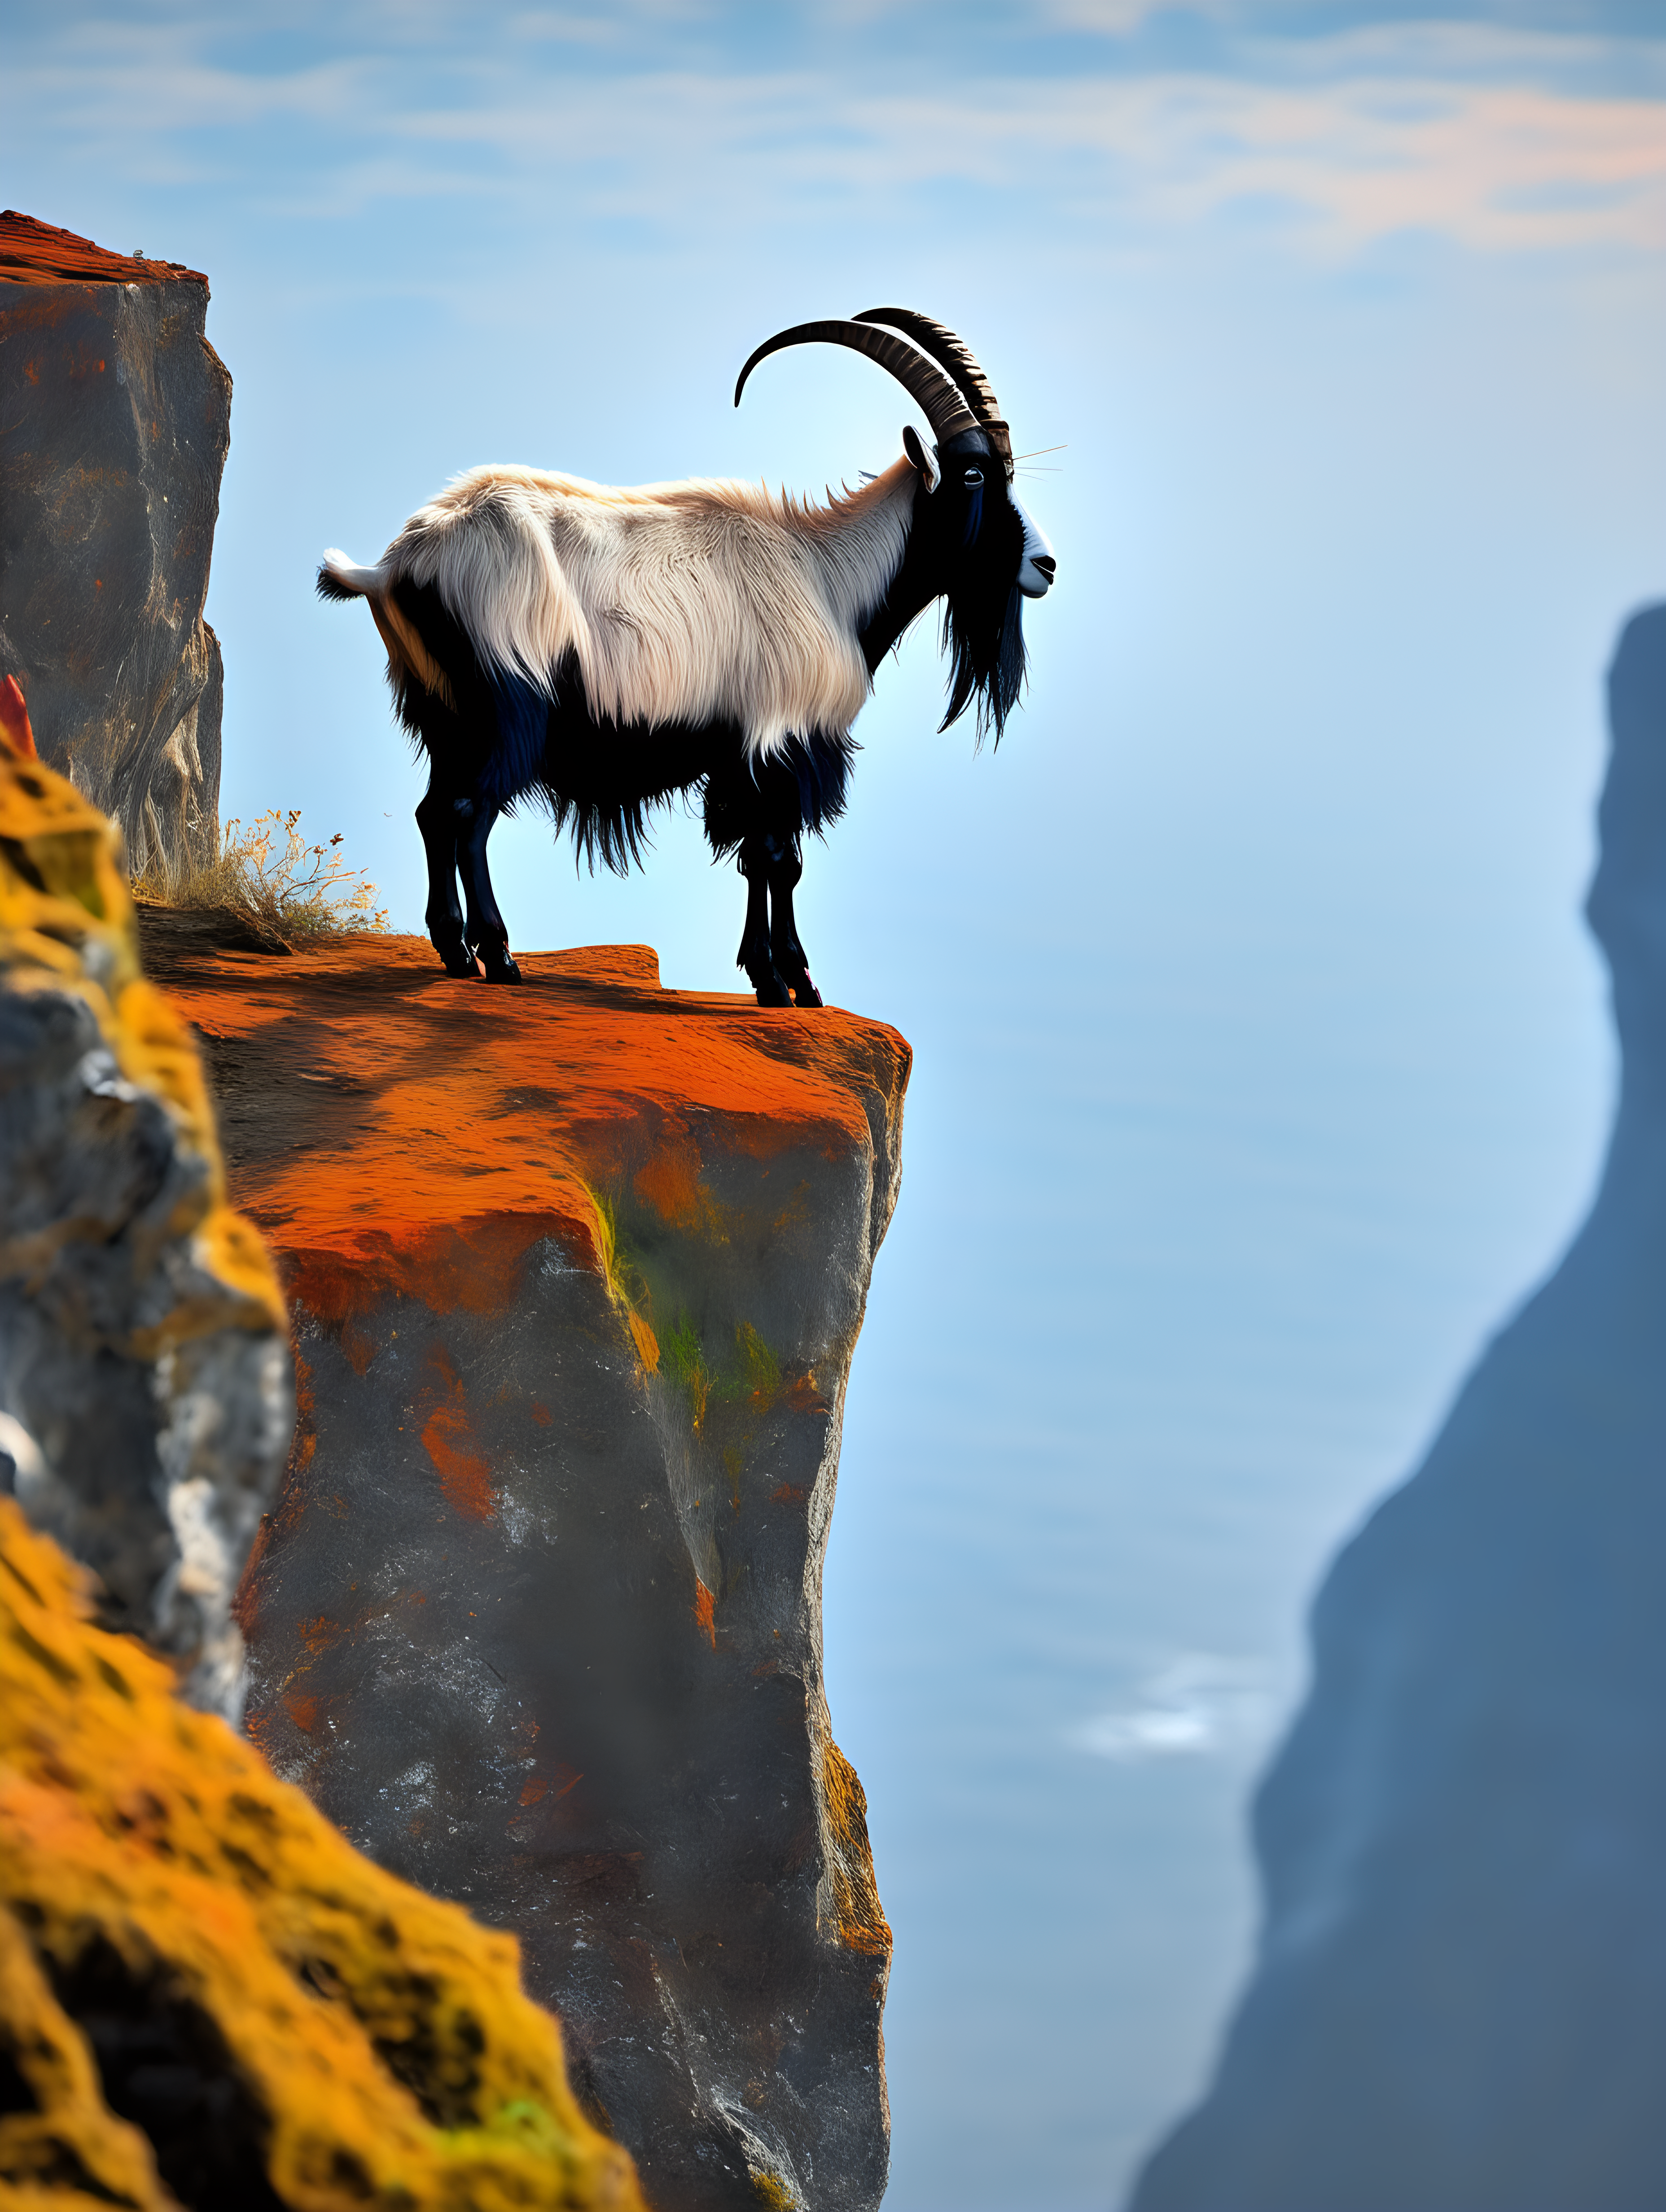 wild goat on the edge of a cliff, vivid colors